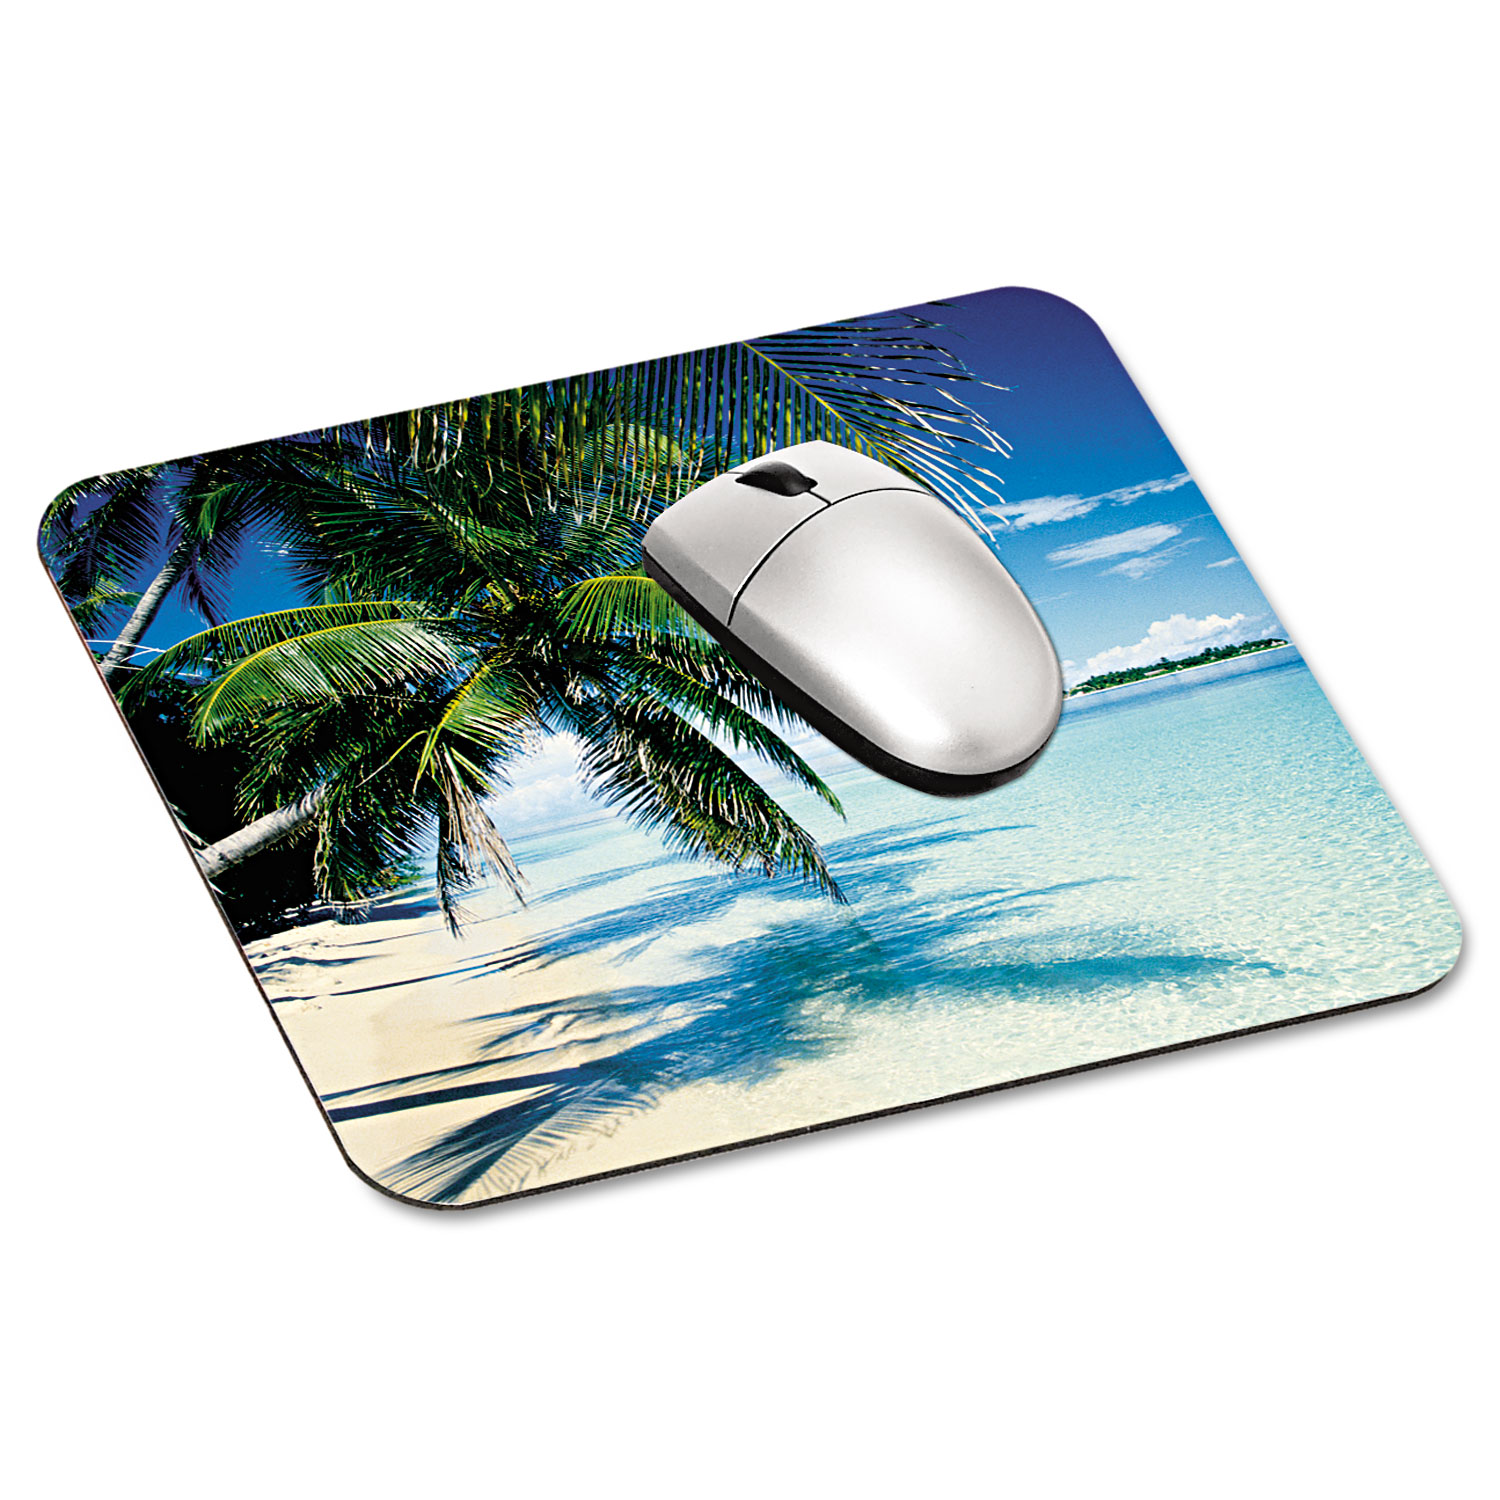 Mouse Pad with Precise Mousing Surface, 9 x 8 x 1/8, Beach Design